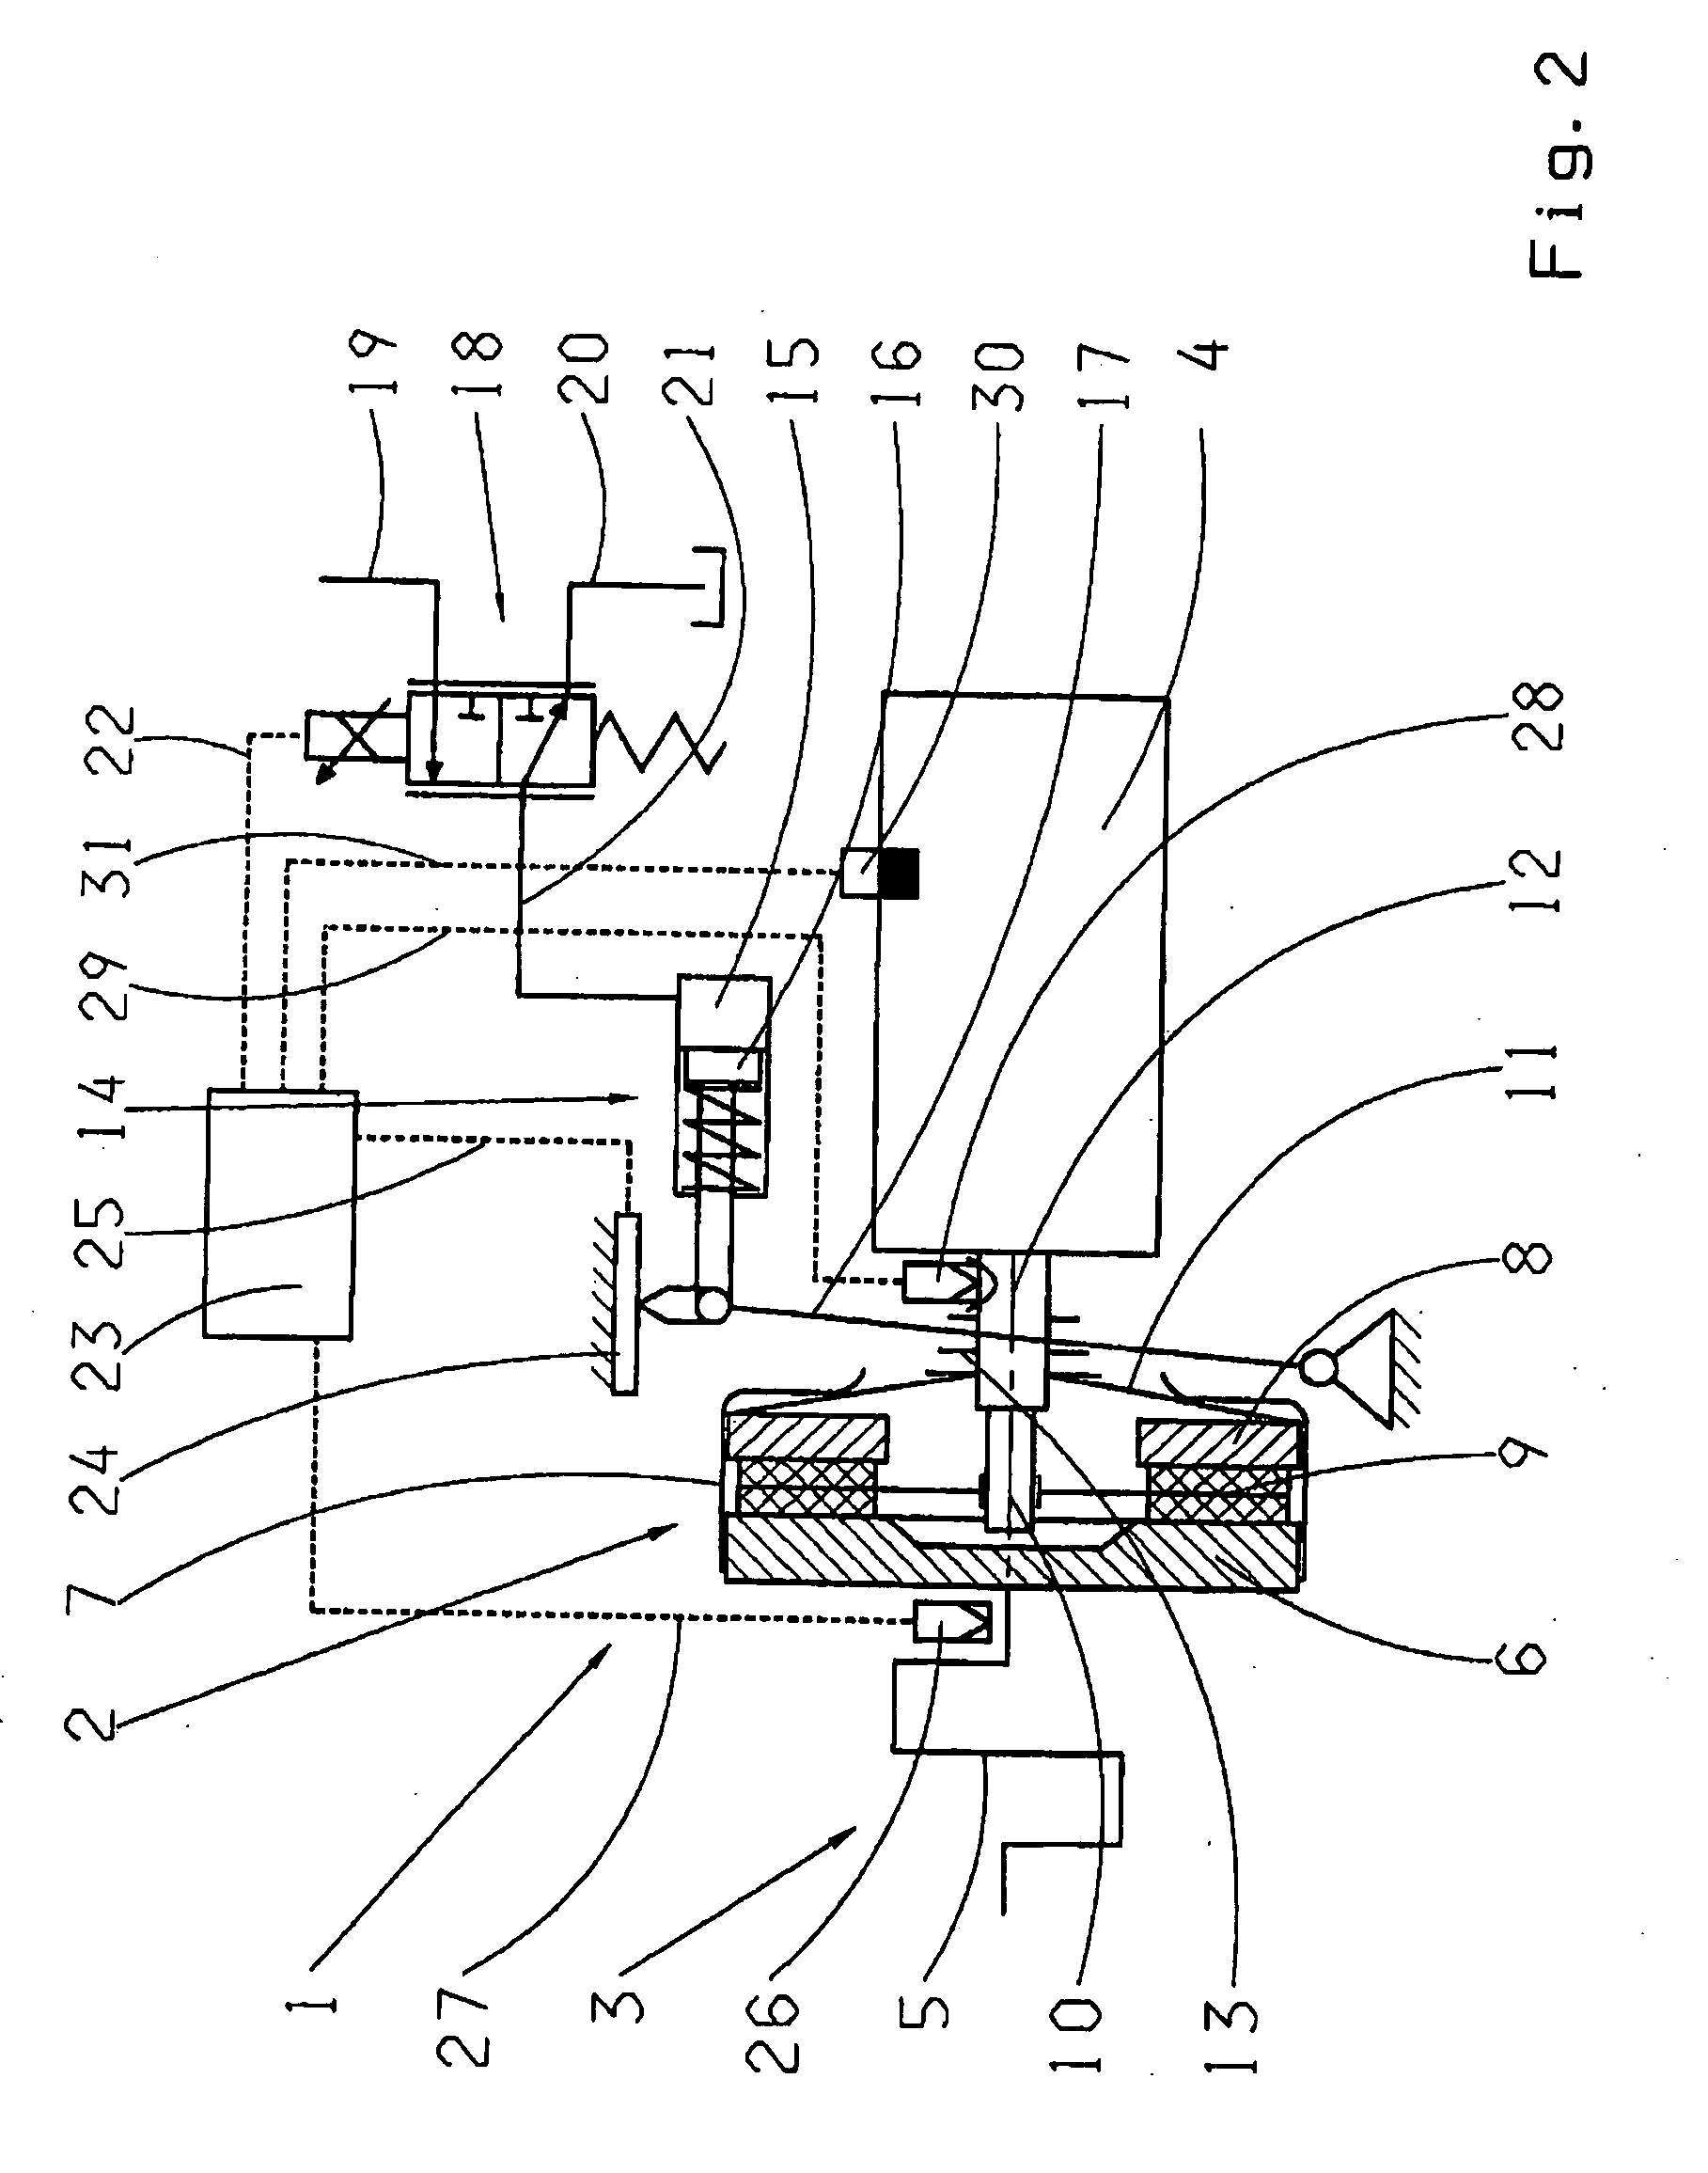 Method for determining a torque characteristic of an automated friction clutch